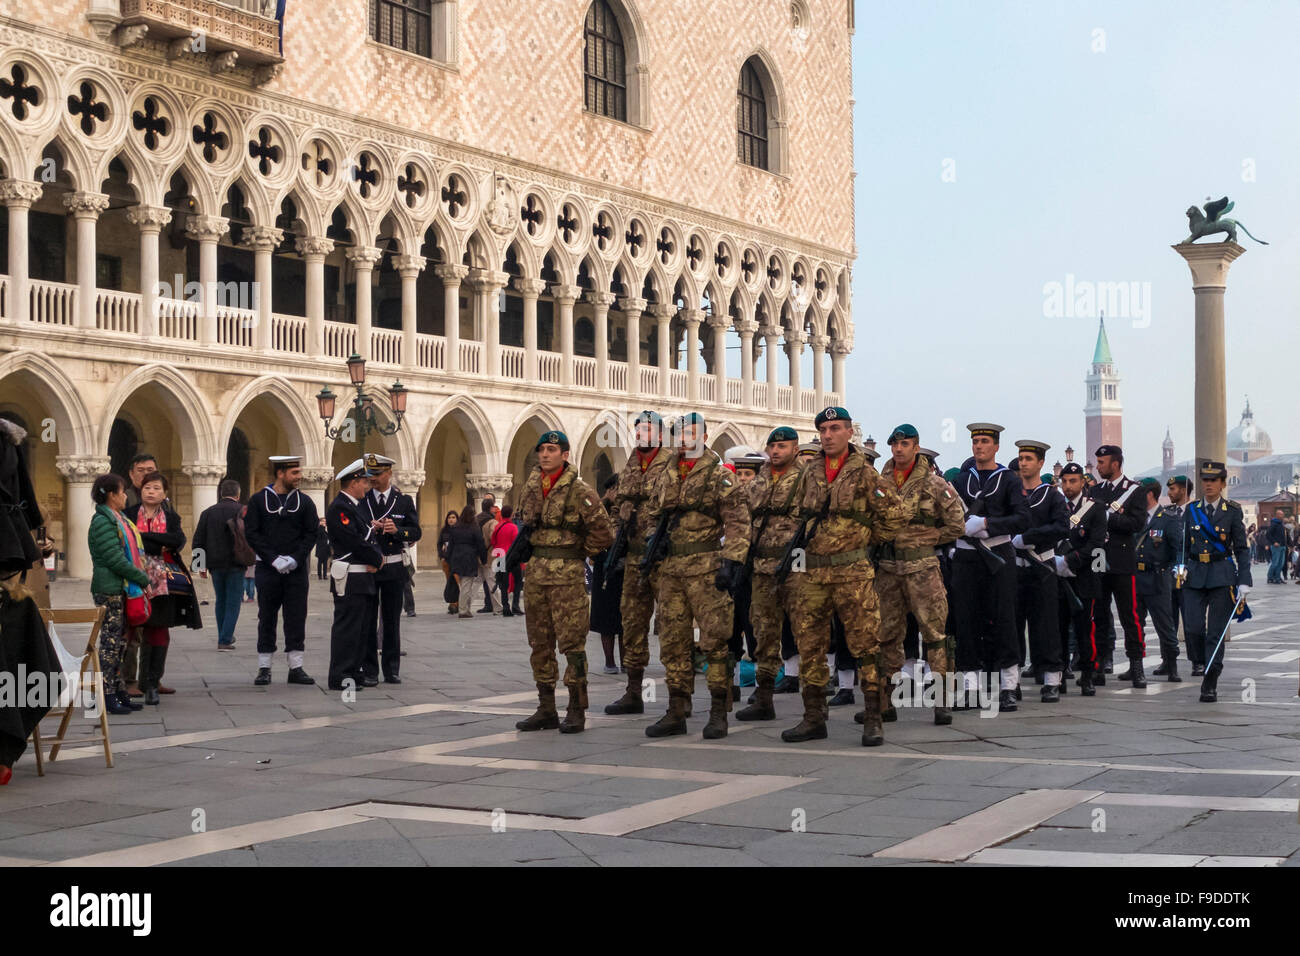 Venice, St Mark's Square. Italian soldiers march past the Doges Palace to attend to lowering of the flag ceremony at dusk Stock Photo